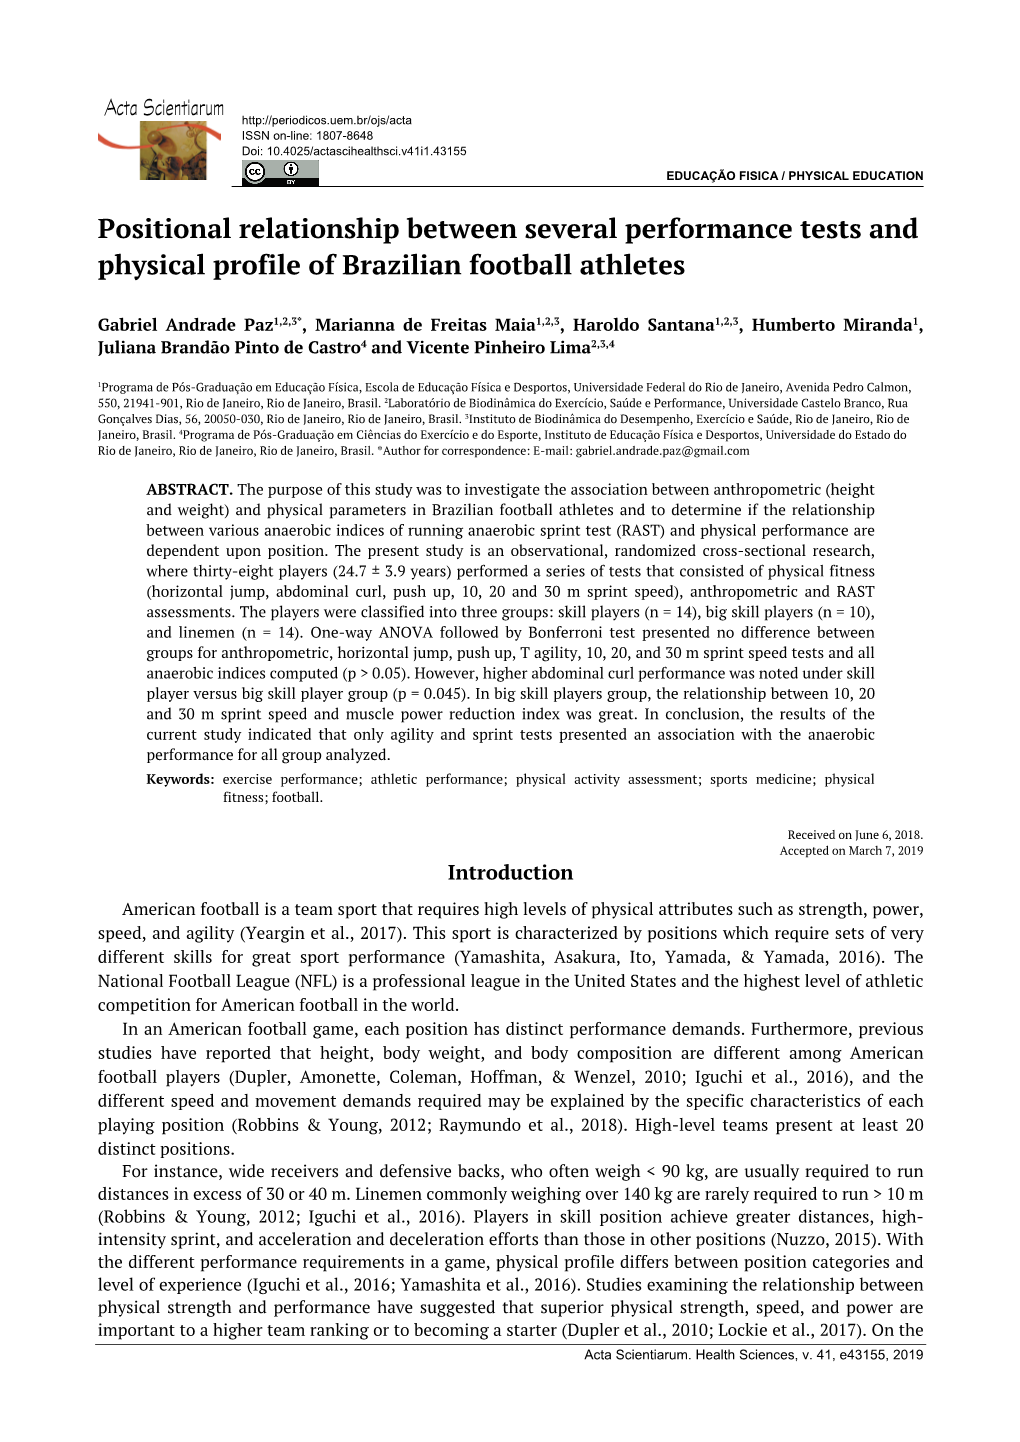 Positional Relationship Between Several Performance Tests and Physical Profile of Brazilian Football Athletes